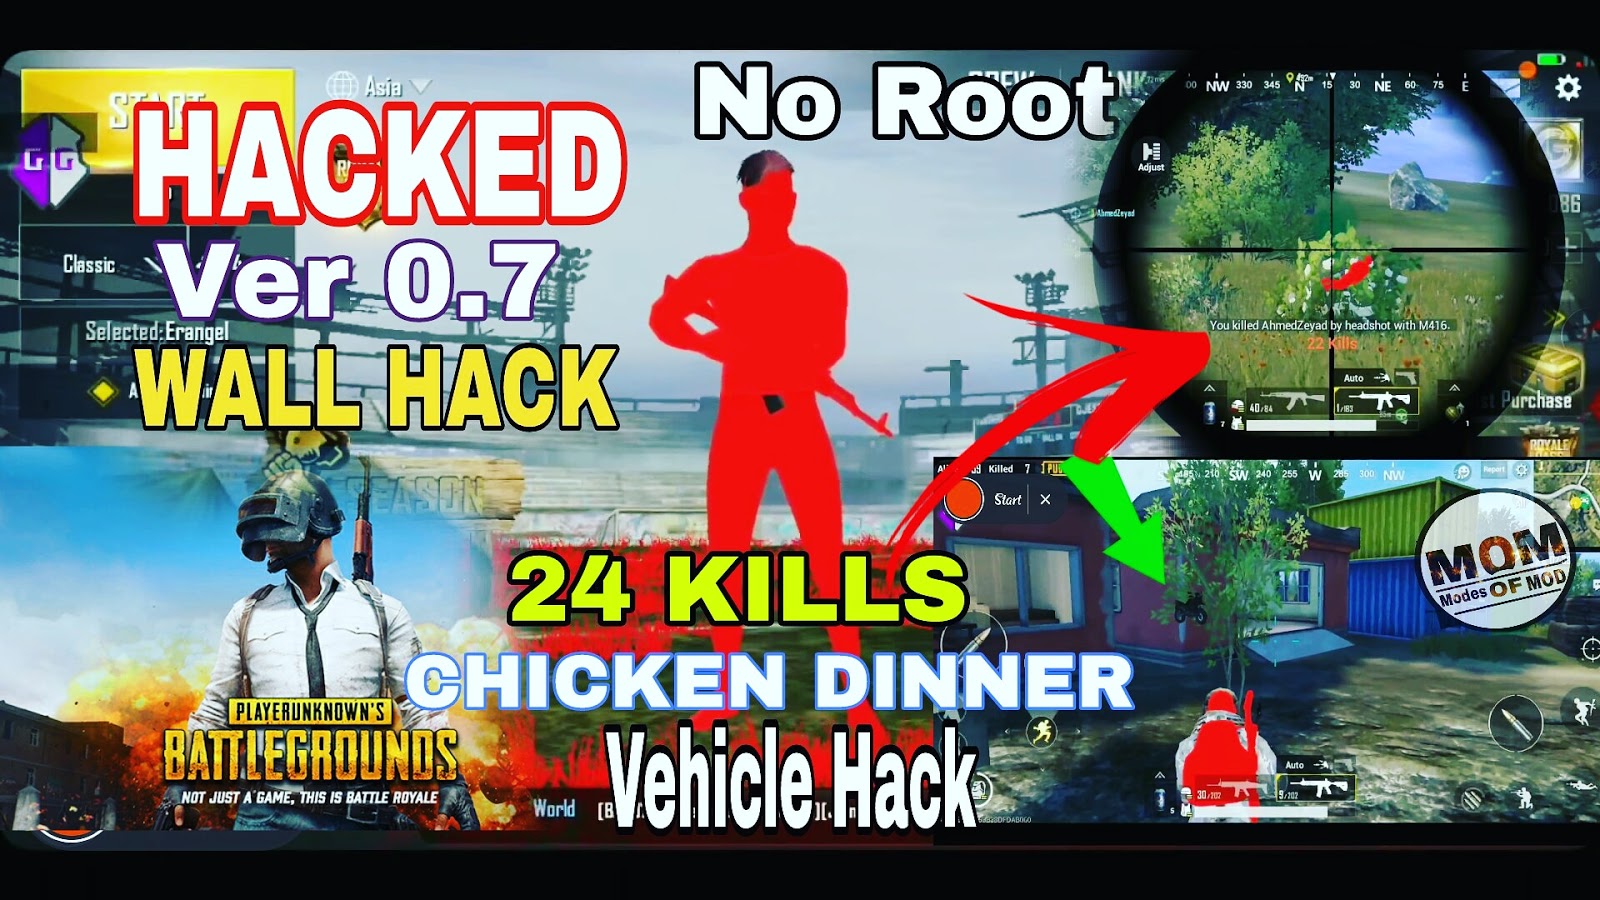 Pubg Mobile Update Ver 0 7 0 Hacked Mod Apk 2018 Android Ios - pubg mobile update ver 0 7 0 hacked mod apk 2018 android ios modes of mods